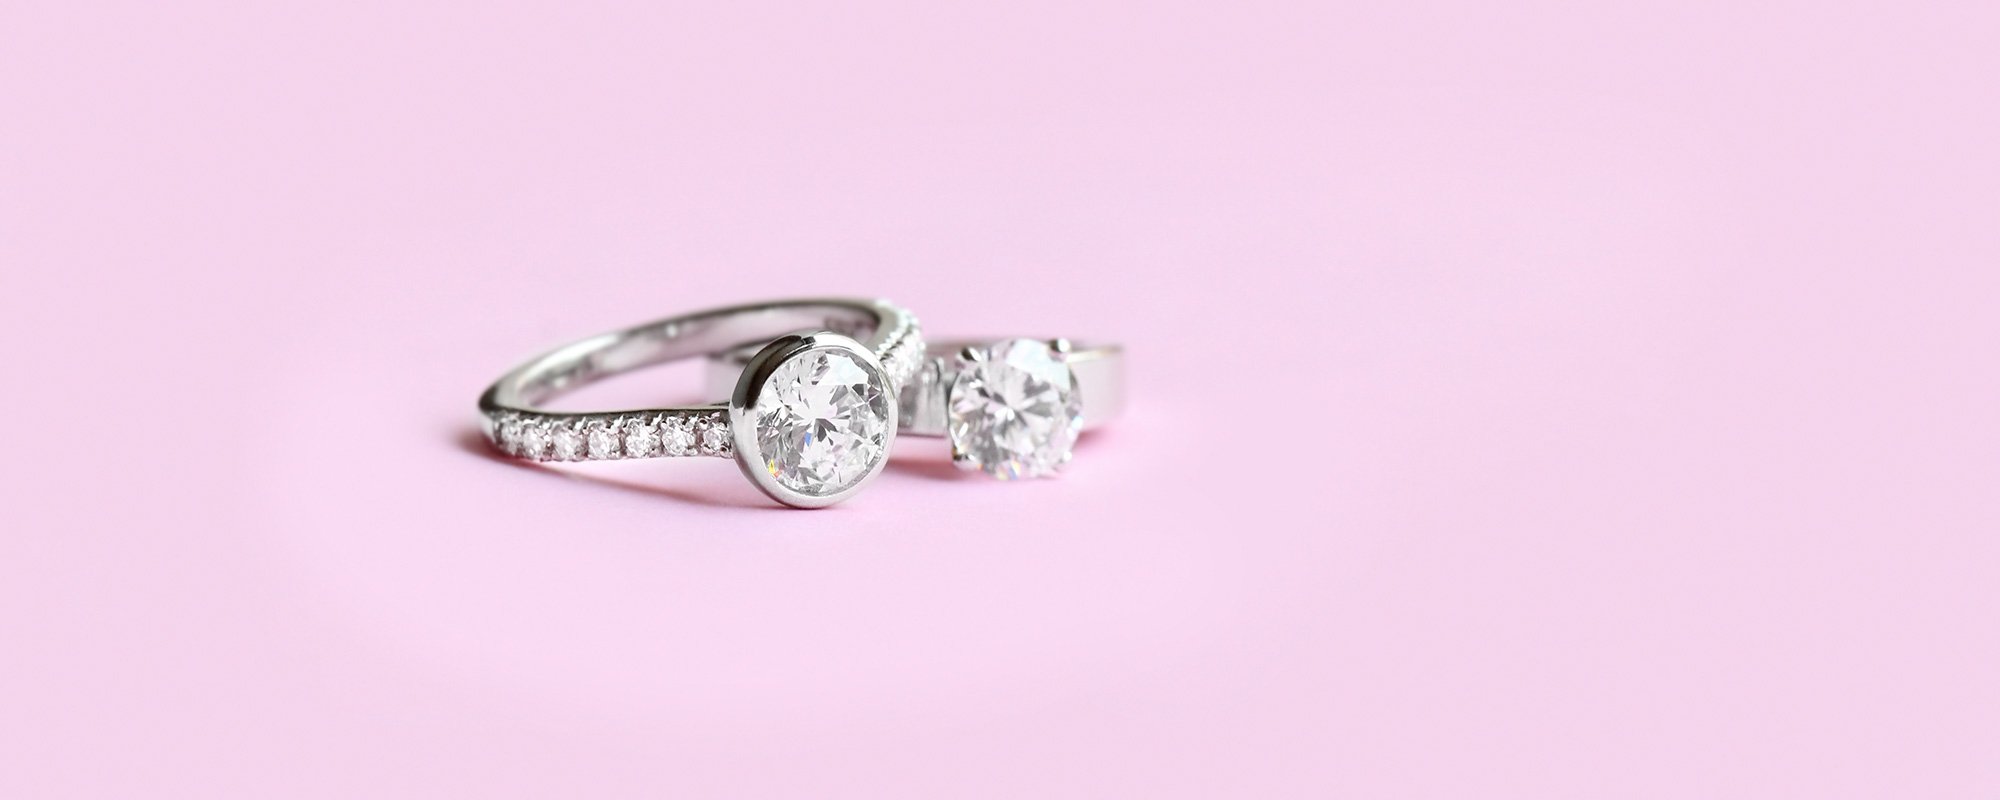 Ethical Engagement Rings for the Modern Bride